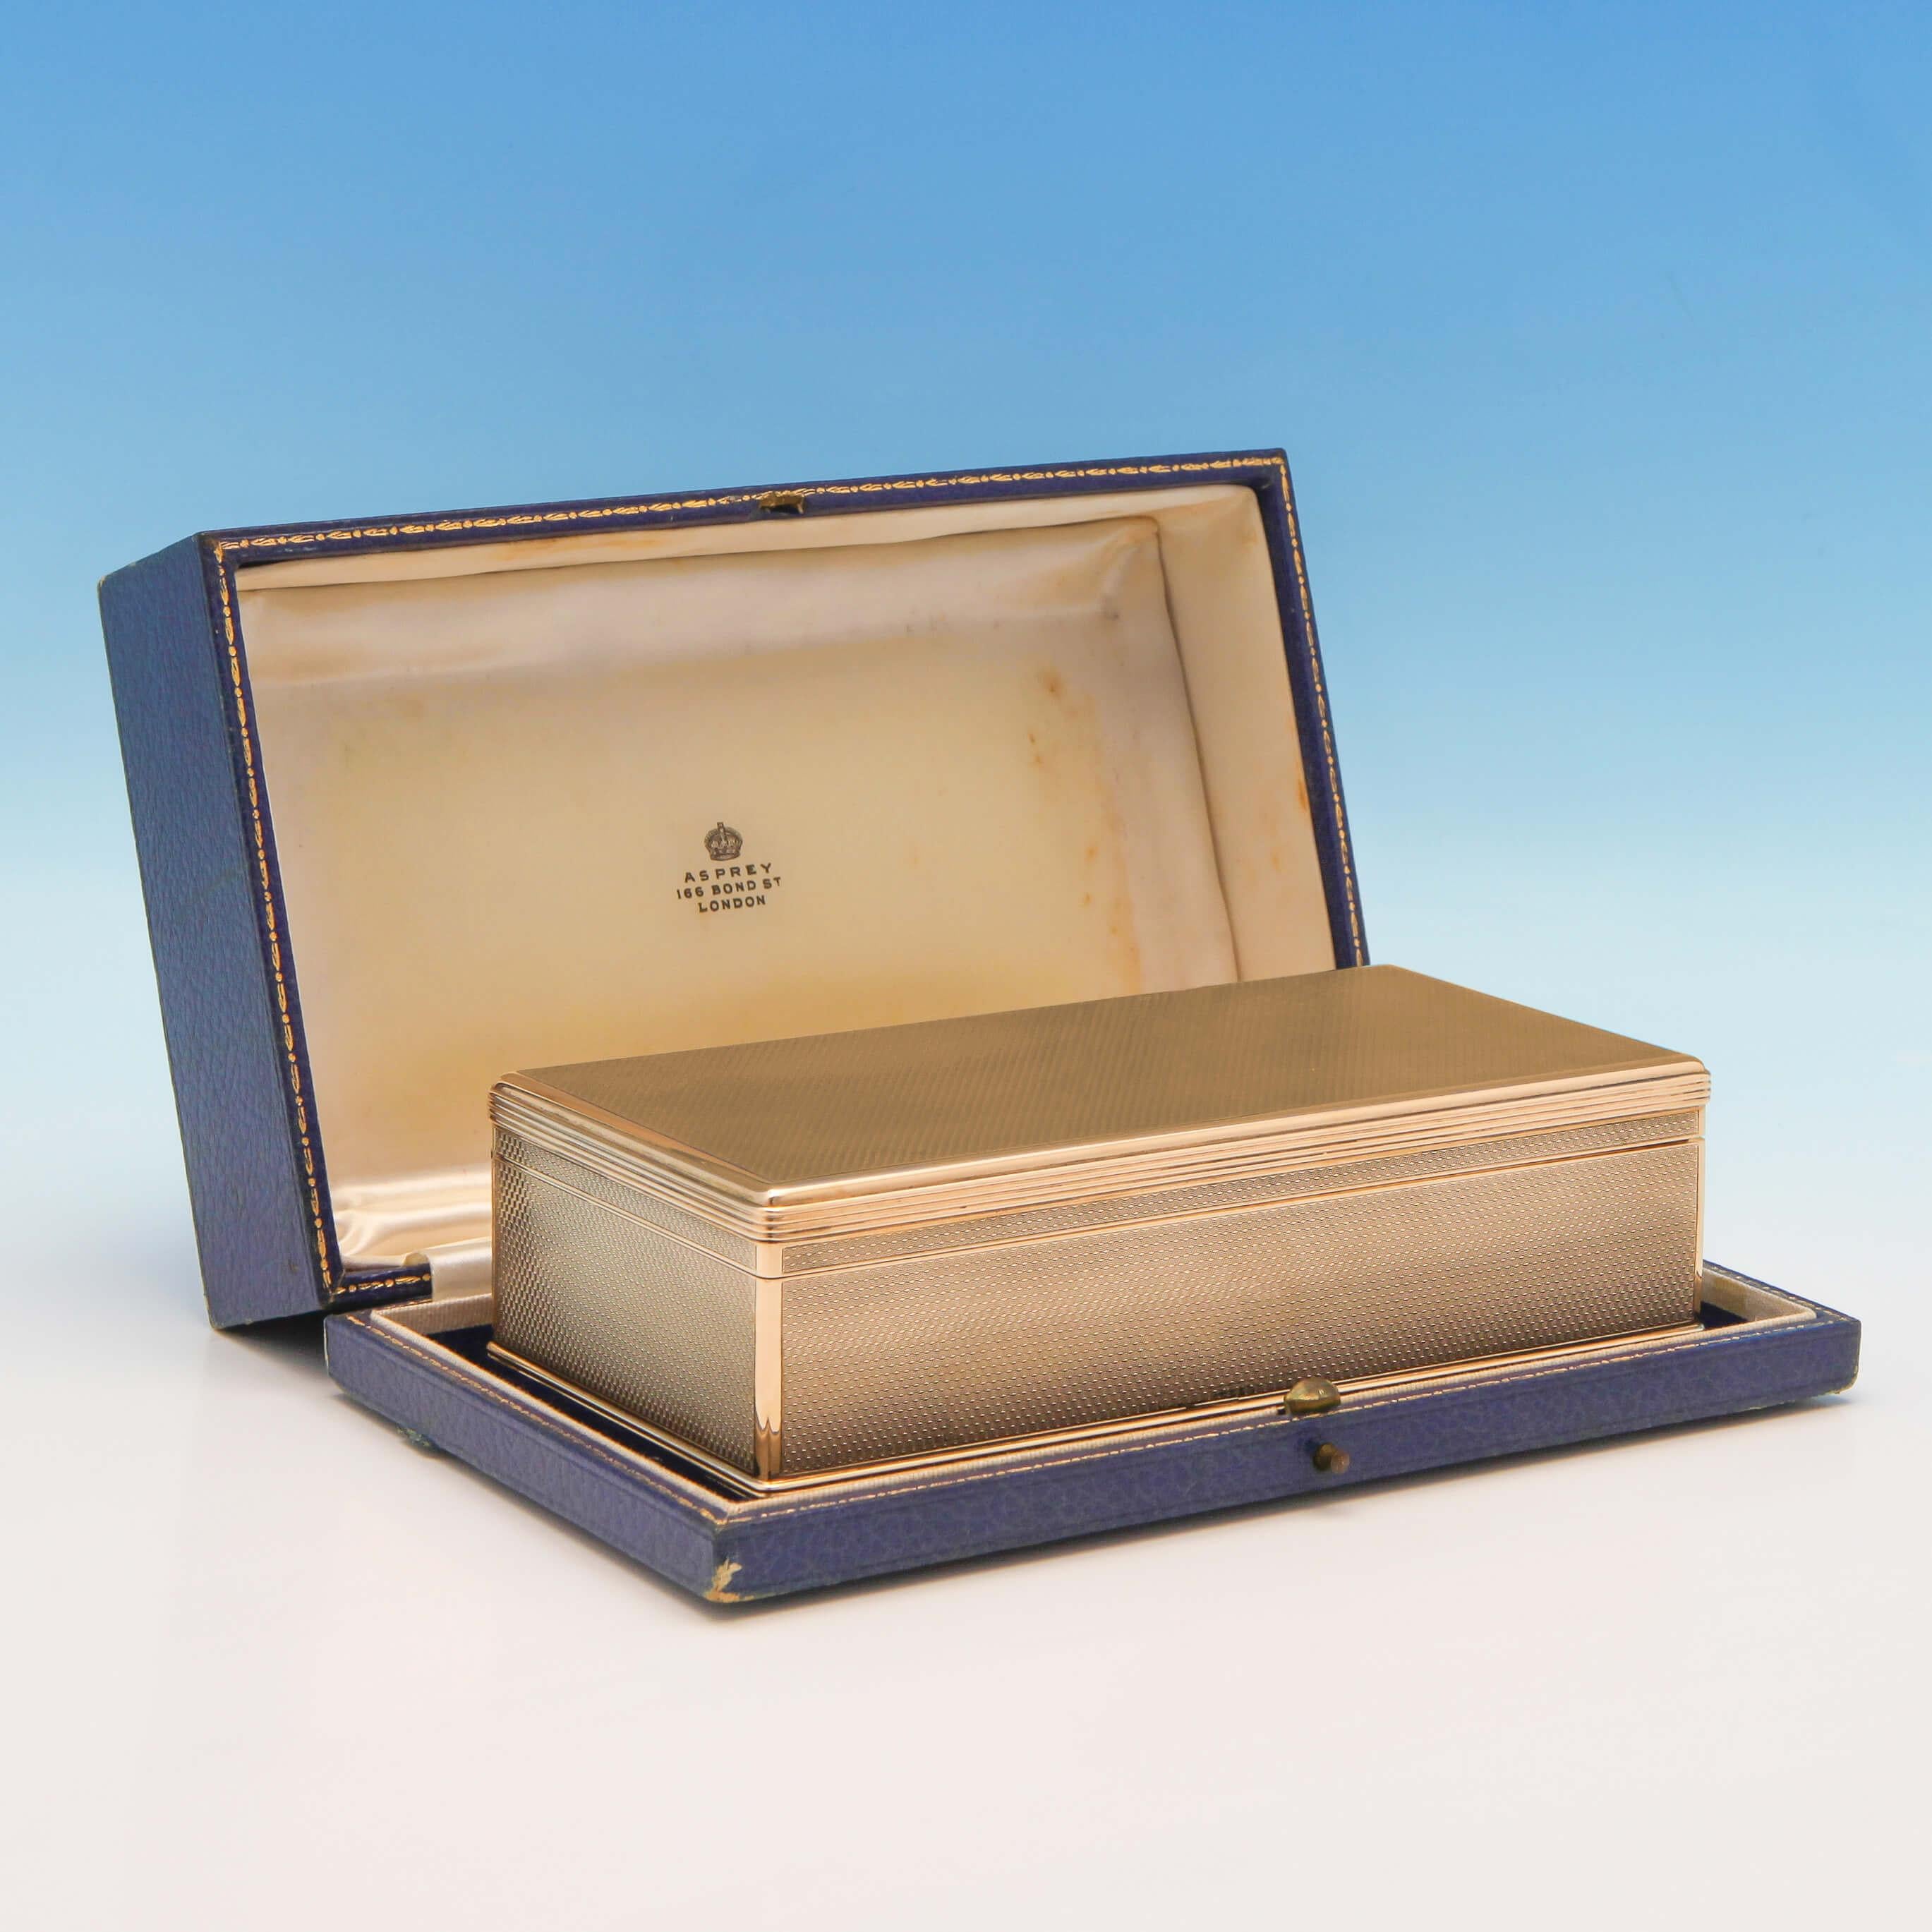 Hallmarked in London in 1928 by Asprey & Co. Ltd. This rare 9-carat gold cigar box has engine turned decoration and reeded borders. The box is cedar lined and comes in its original presentation box. There is an inscription on the inside lid